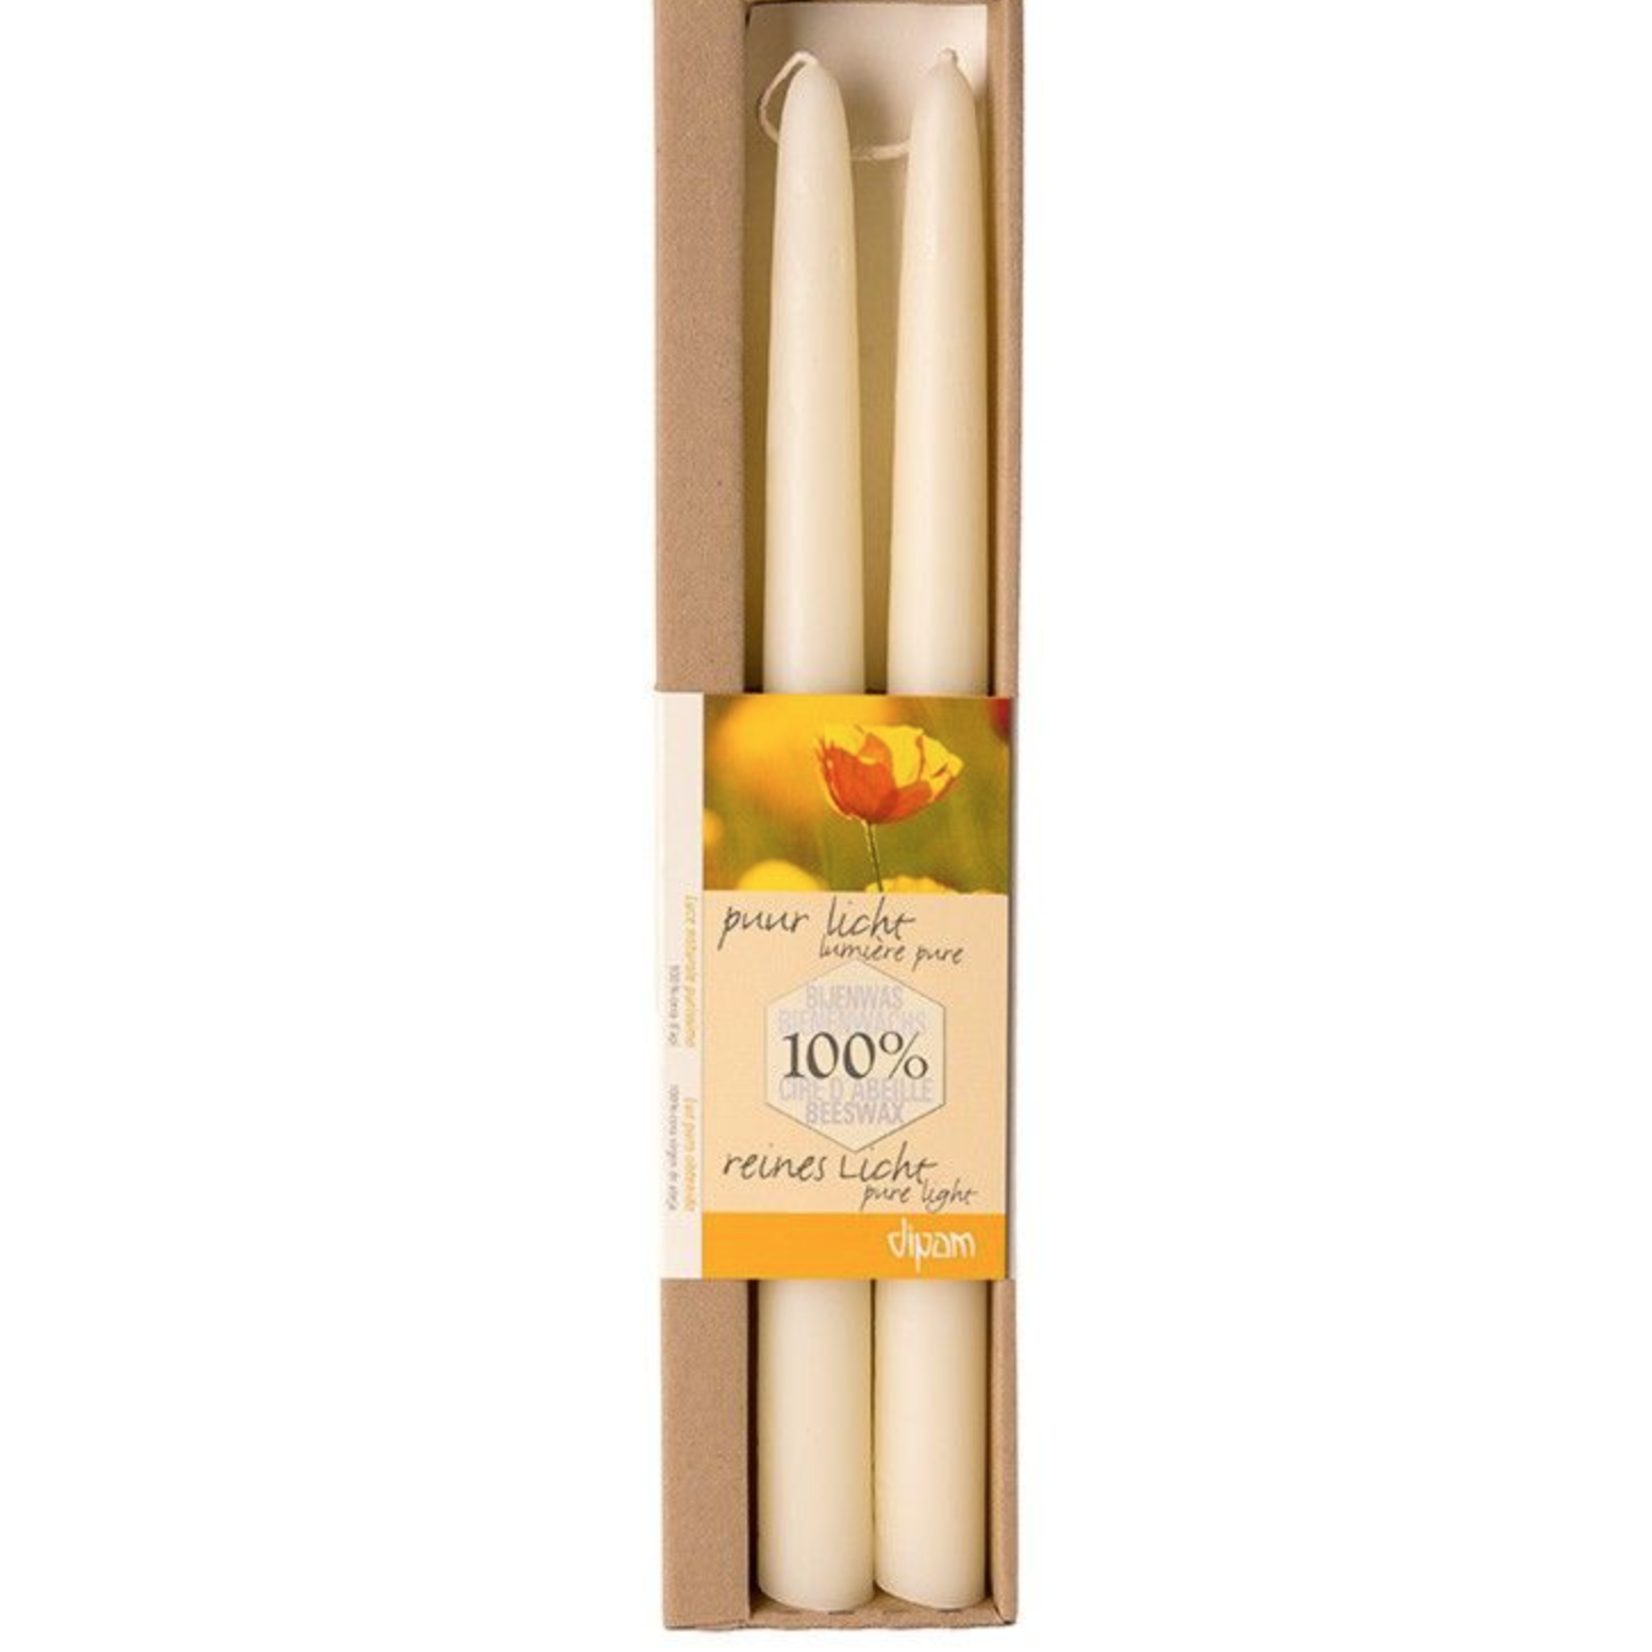 Dipam beeswax candles - ivory (set of 2)